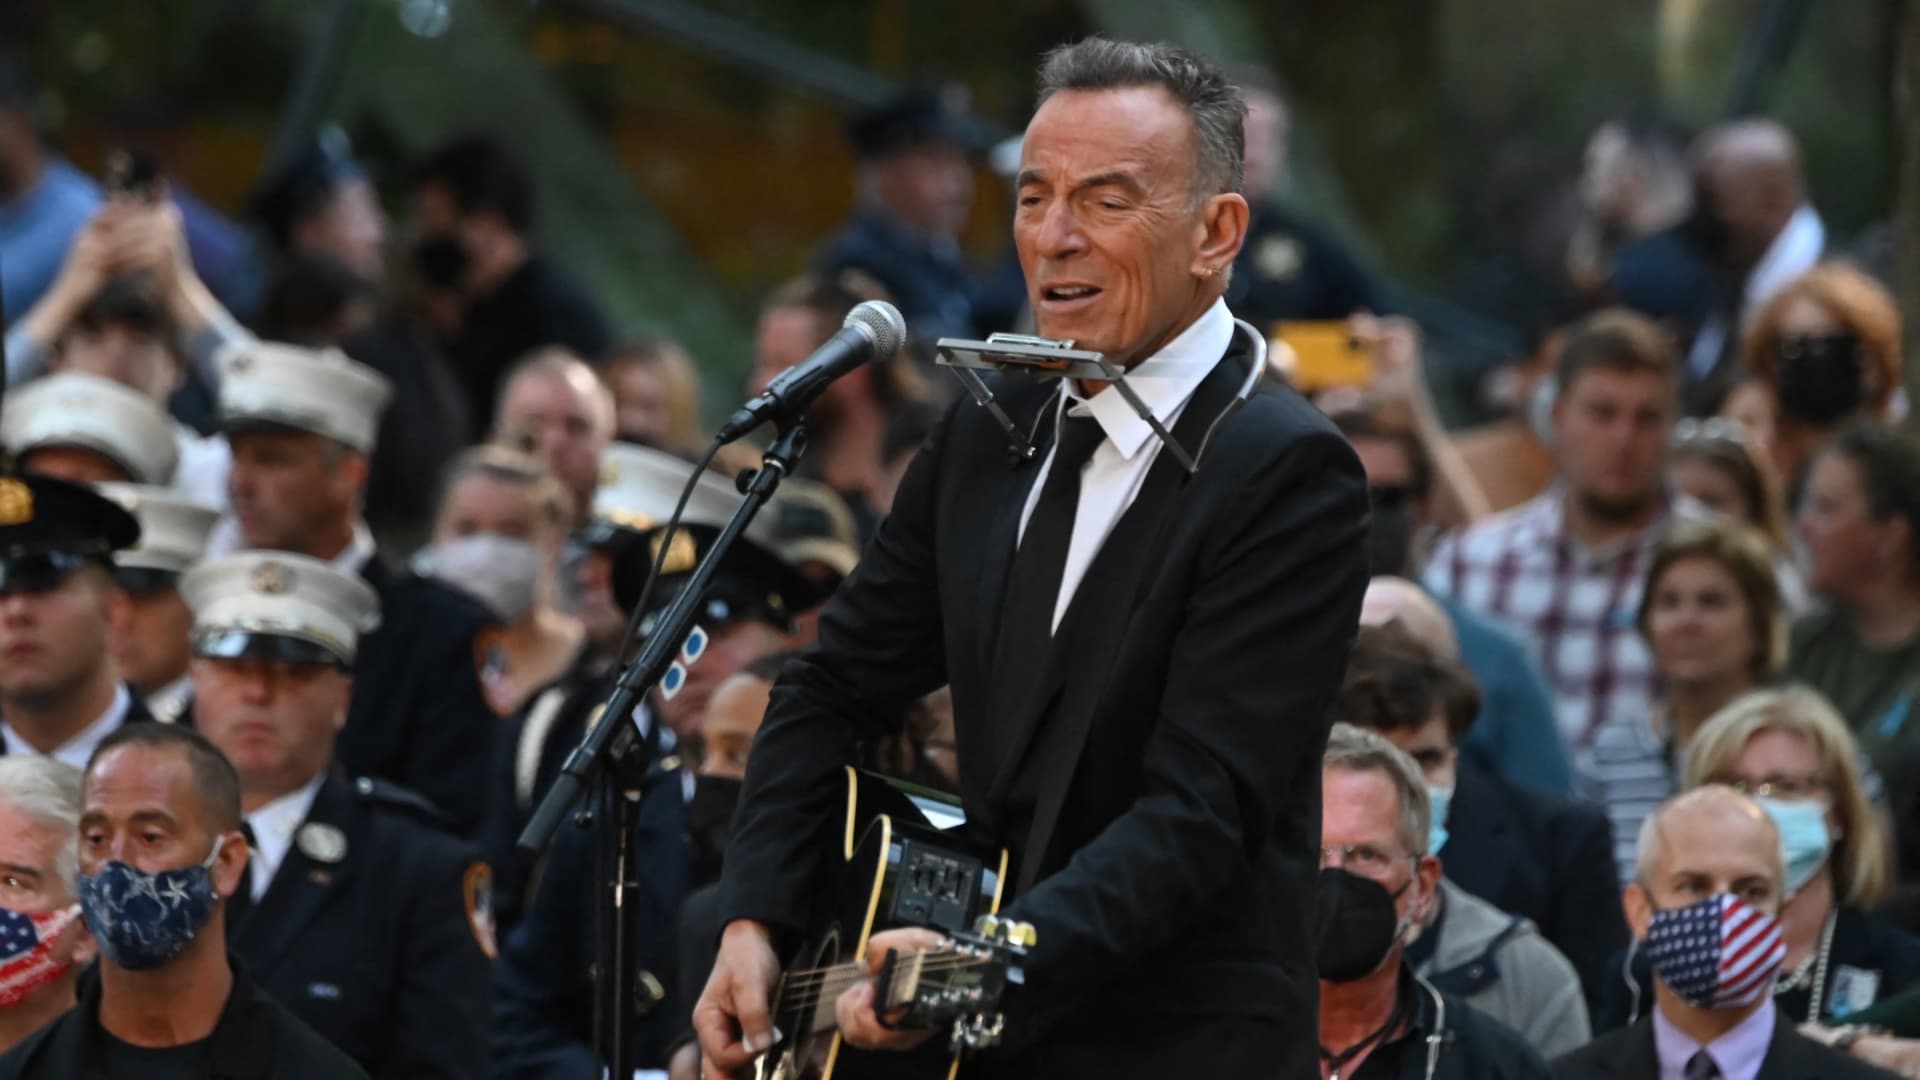 US musician Bruce Springsteen performs a song during a ceremony commemorating the 20th anniversary of the 9/11 attacks on the World Trade Center, in New York, on September 11, 2021.